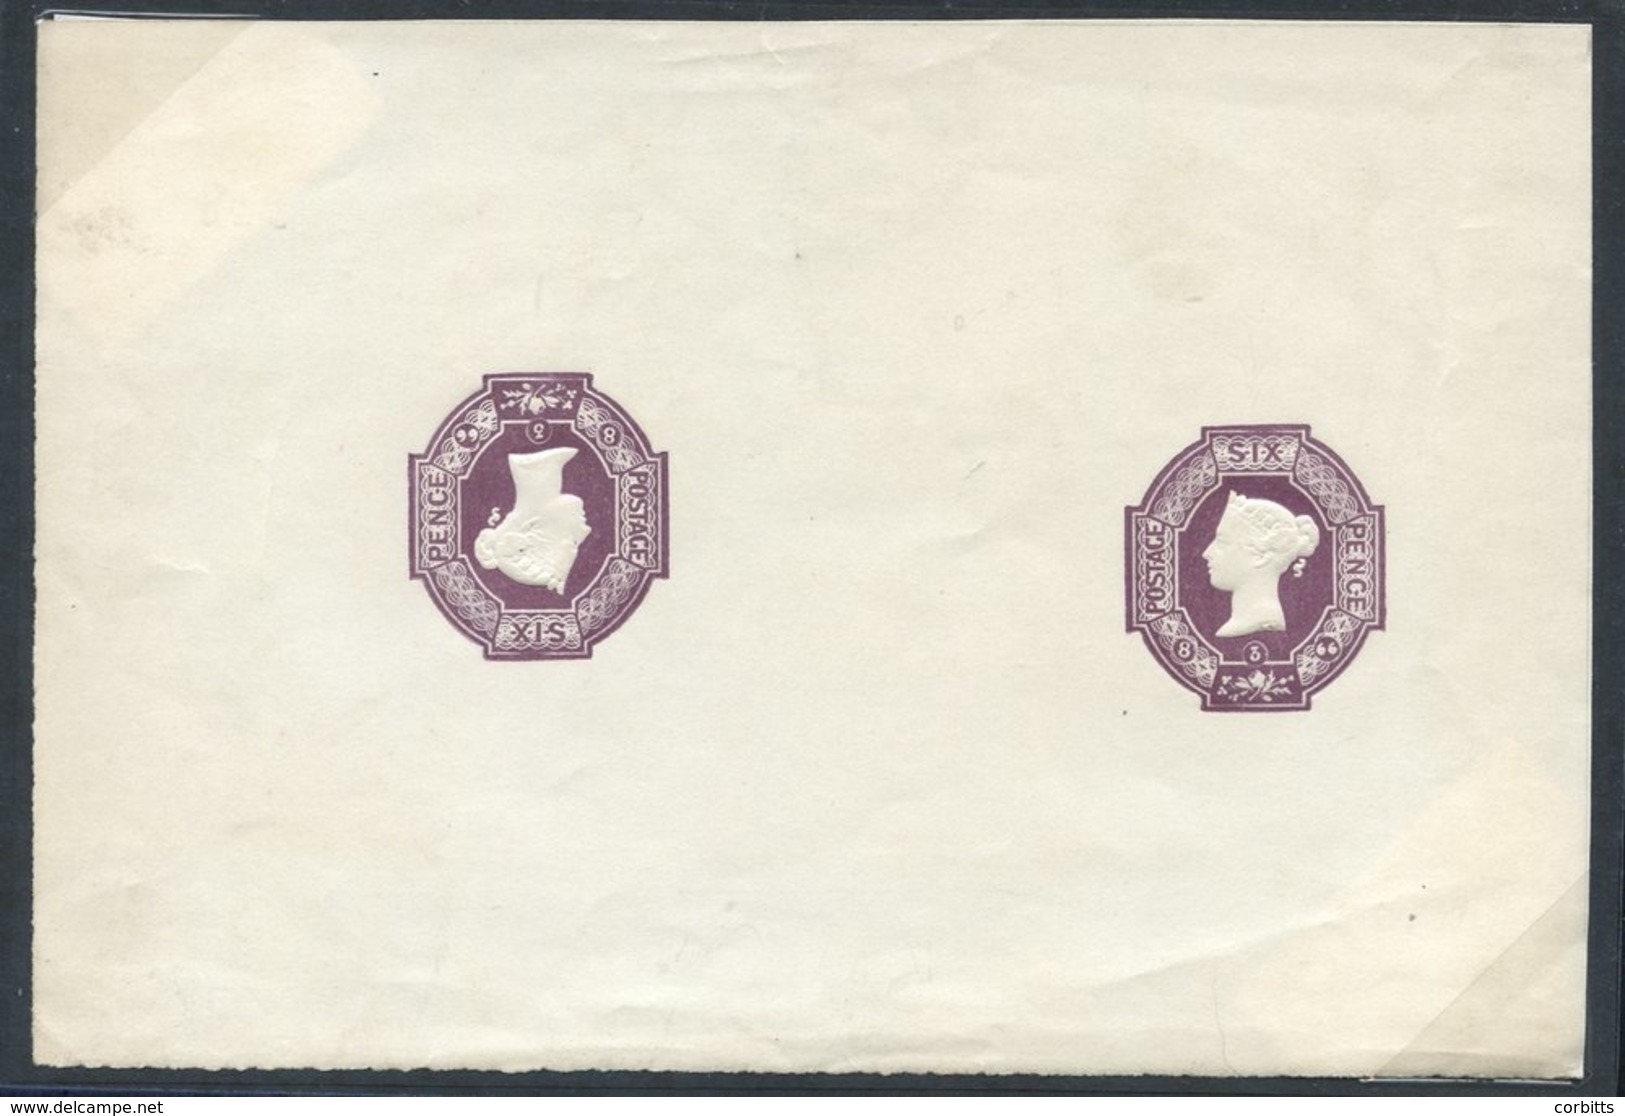 1866 6d Mauve Embossed '2ww' Die, Dated 8.3.66 On Unwatermarked Wove Paper - A Tete-beche Pair. Attractive PROOF. - Other & Unclassified